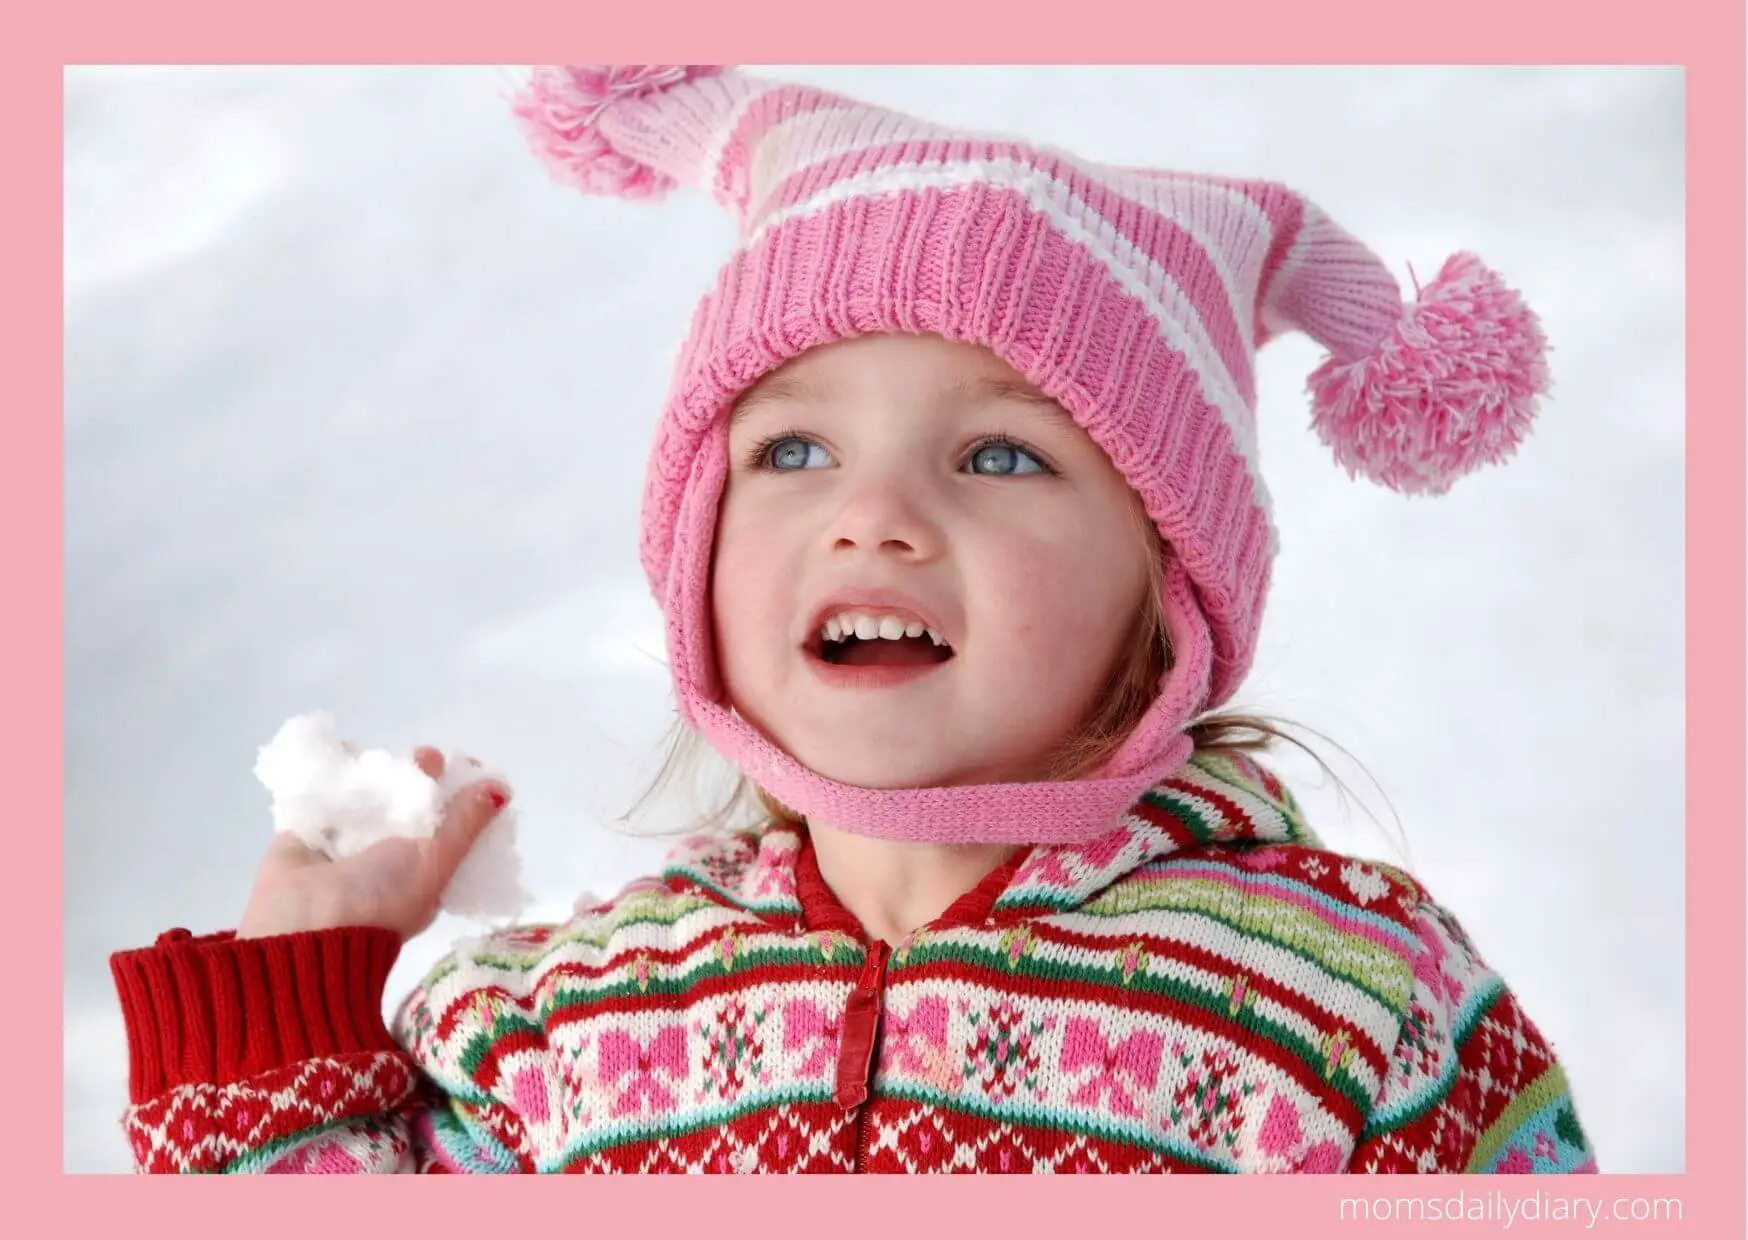 Winter activities: Toddler with a snowball